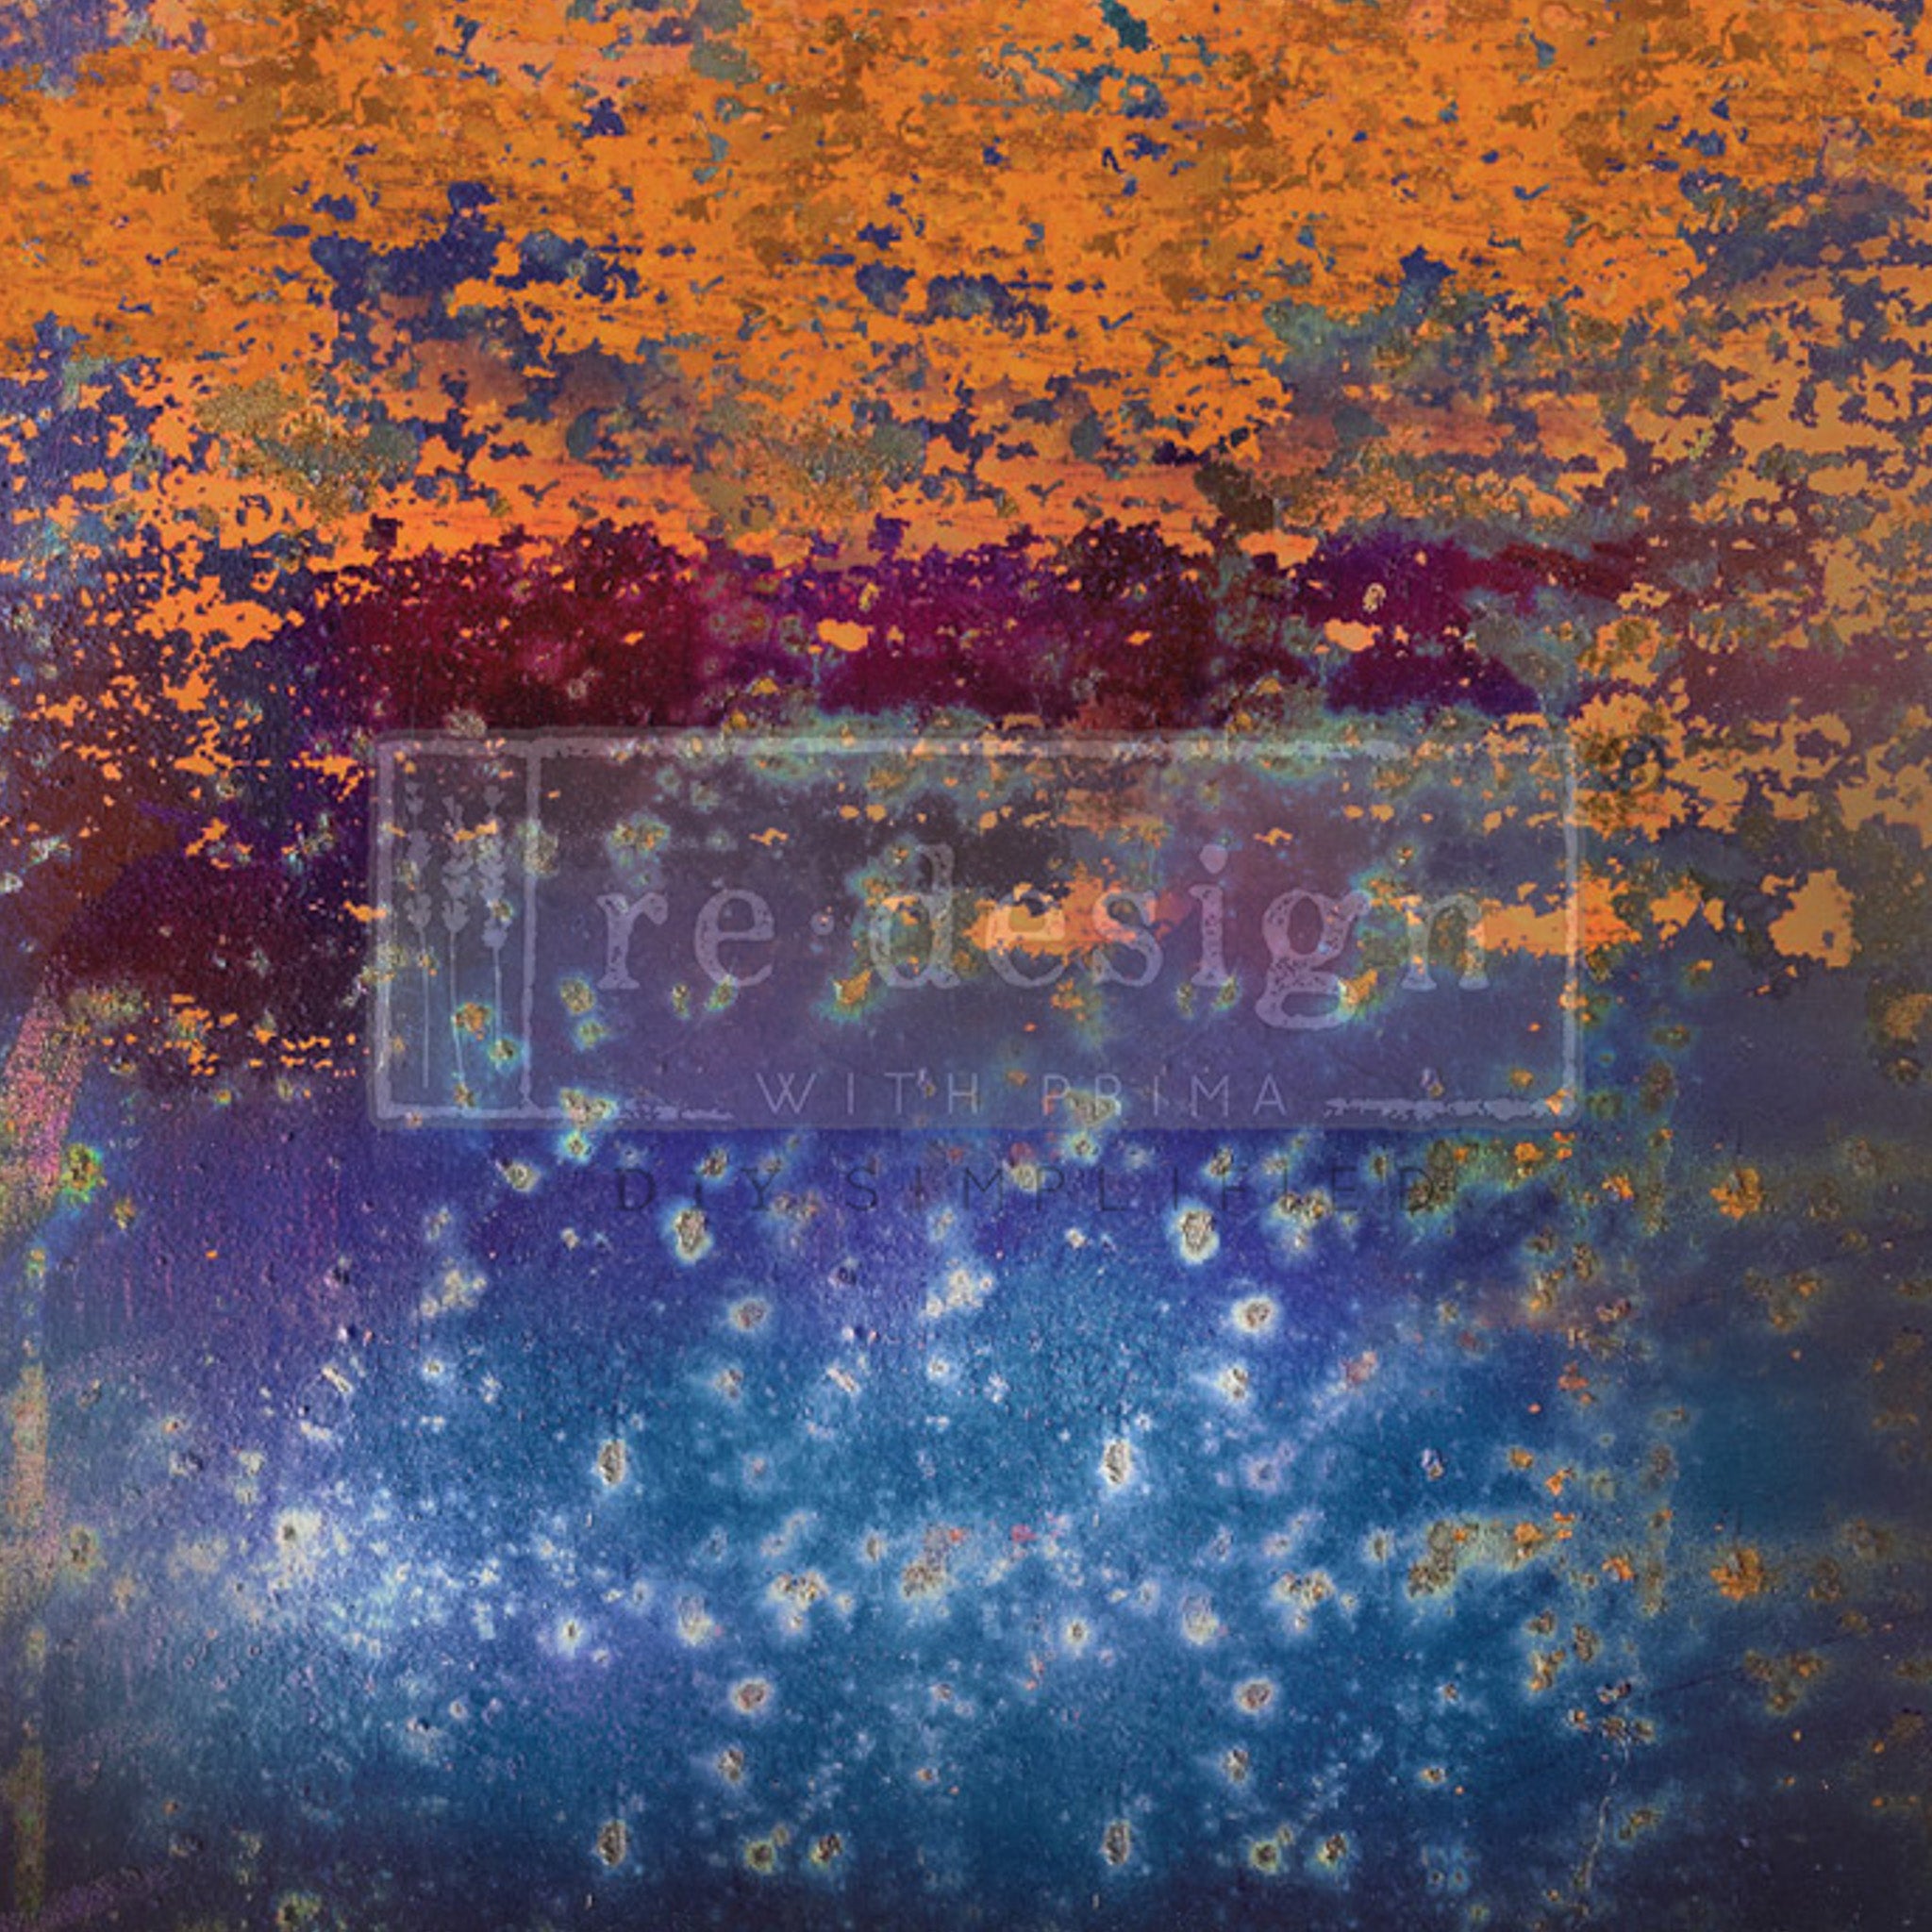 A1 fiber paper design that features red-orange rust scattered against a maroon and blue patina background.